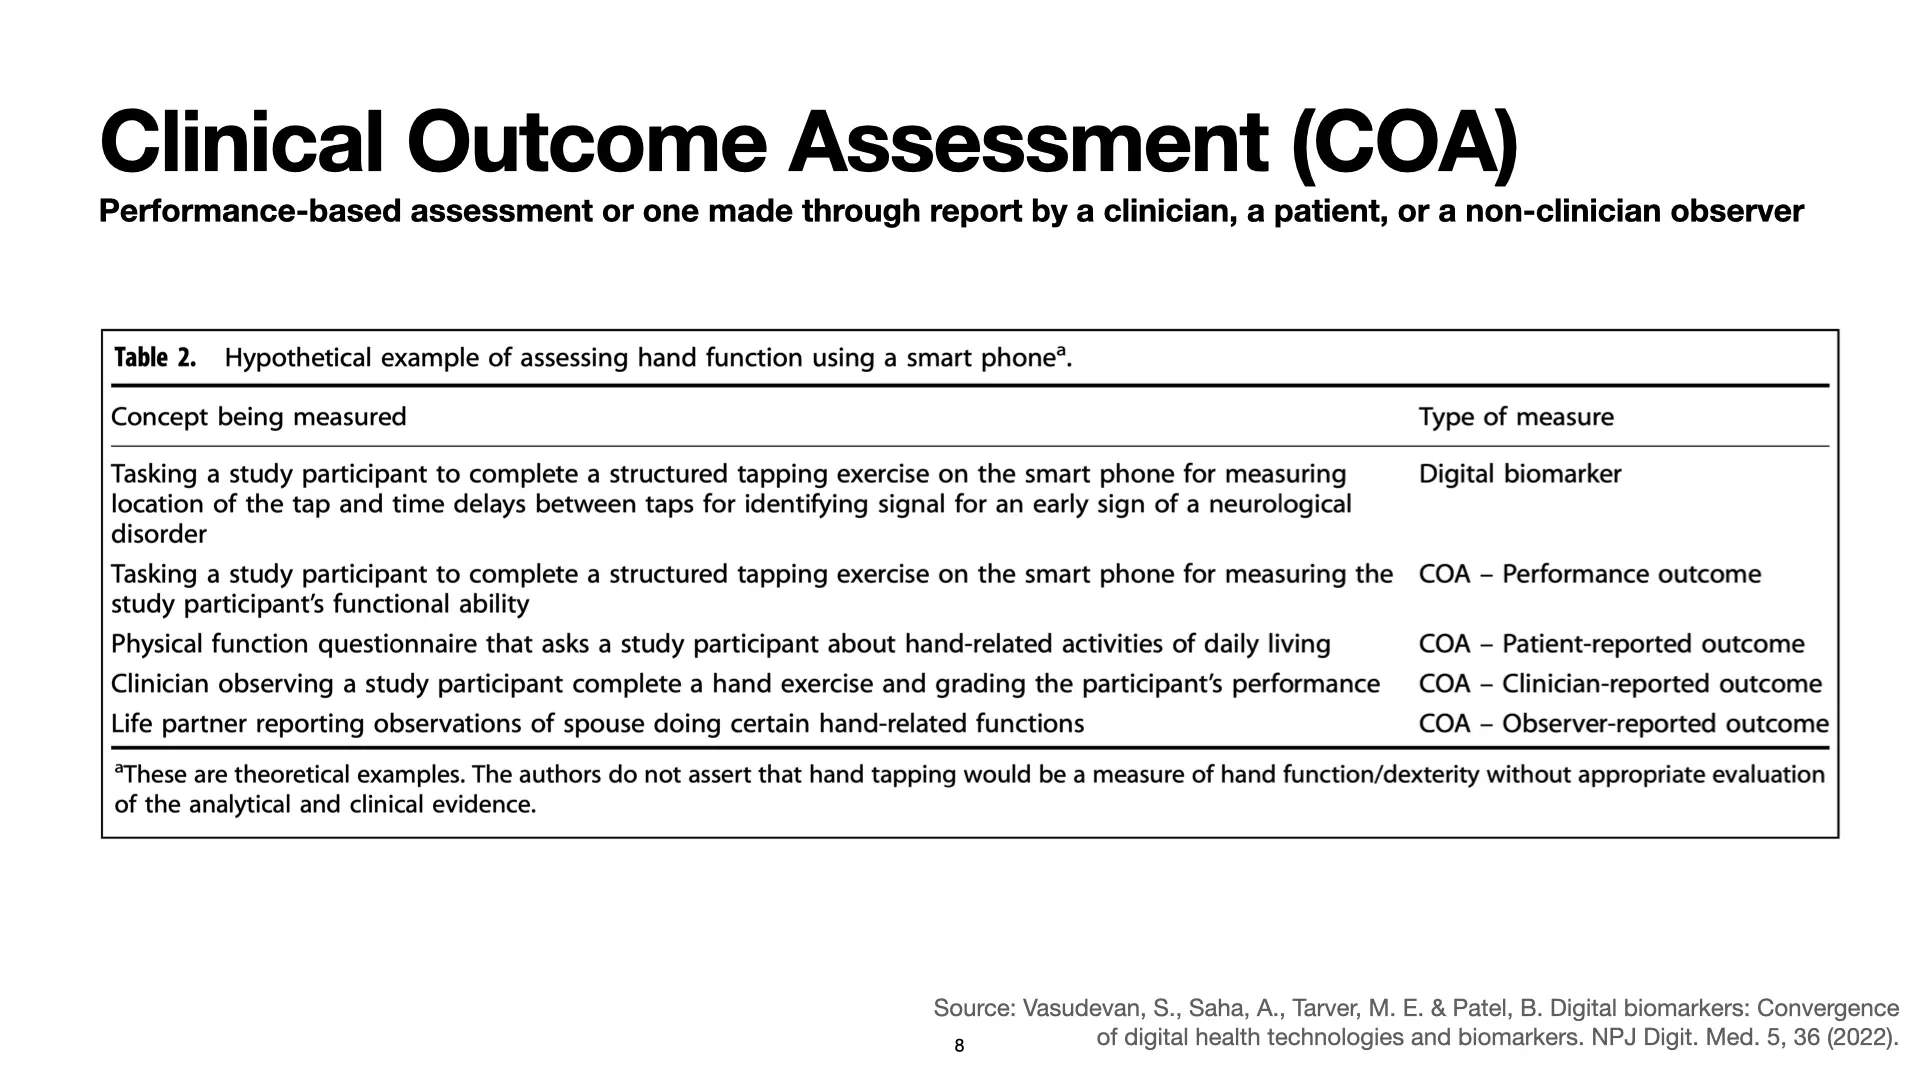 Slide 8: Clinical Outcome Assessment (COA). This slide shows a table from a paper about clinical outcome assessments. The table illustrates how similar measurement technologies can be grouped into different 'types of measures' based on the 'concept being measured'.